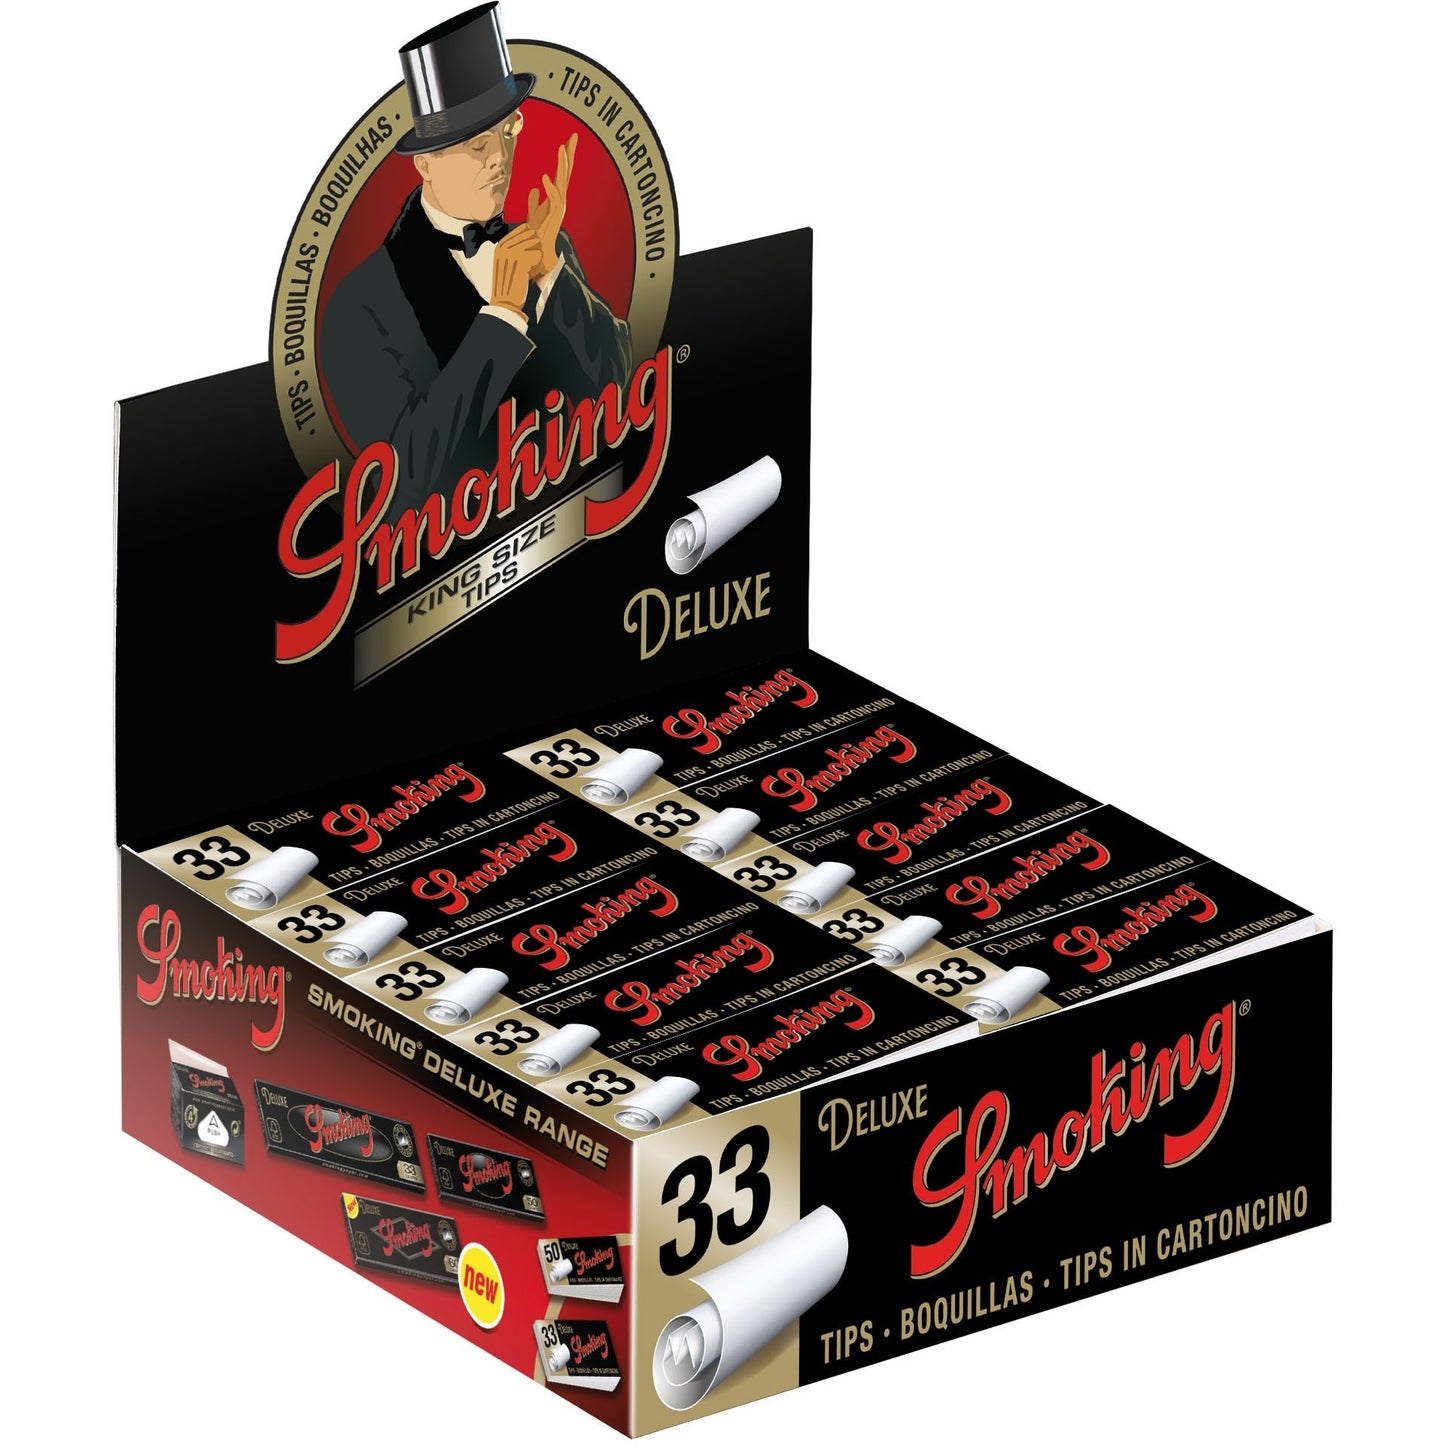 Smoking DeLuxe King Size Tips/Crutchs